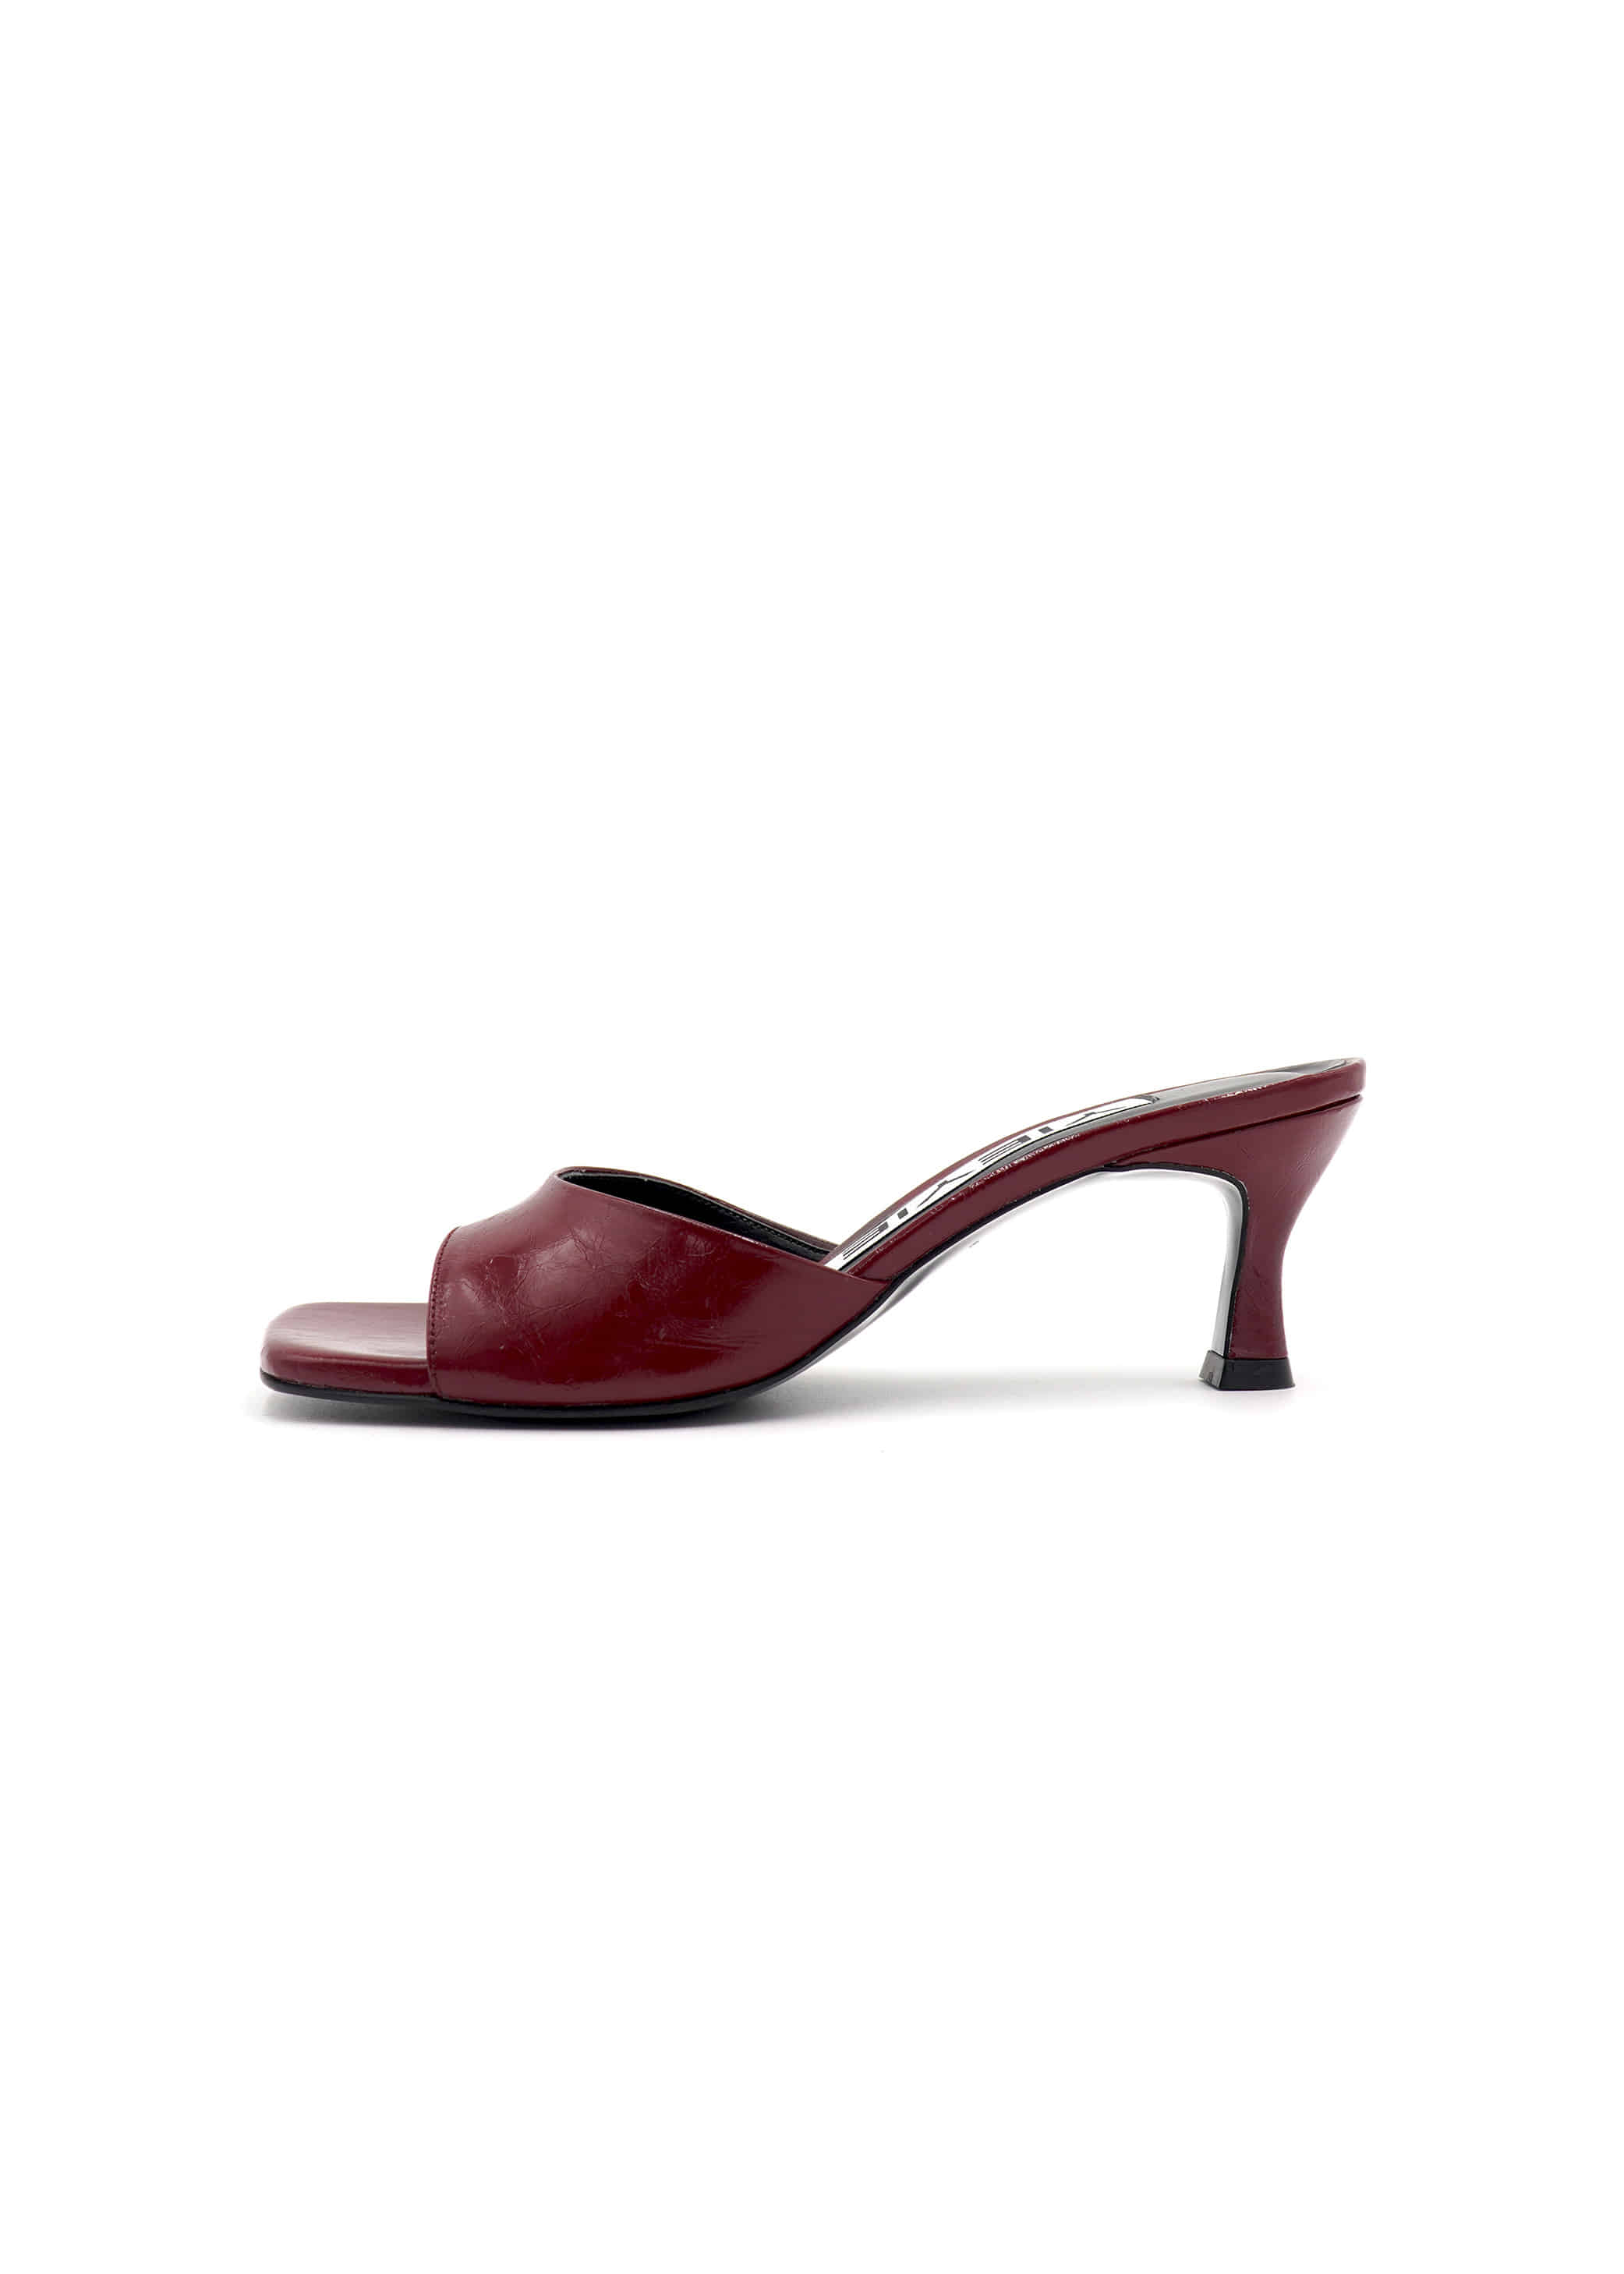 Milly Mules / Y.14-SA06 / 9 colors